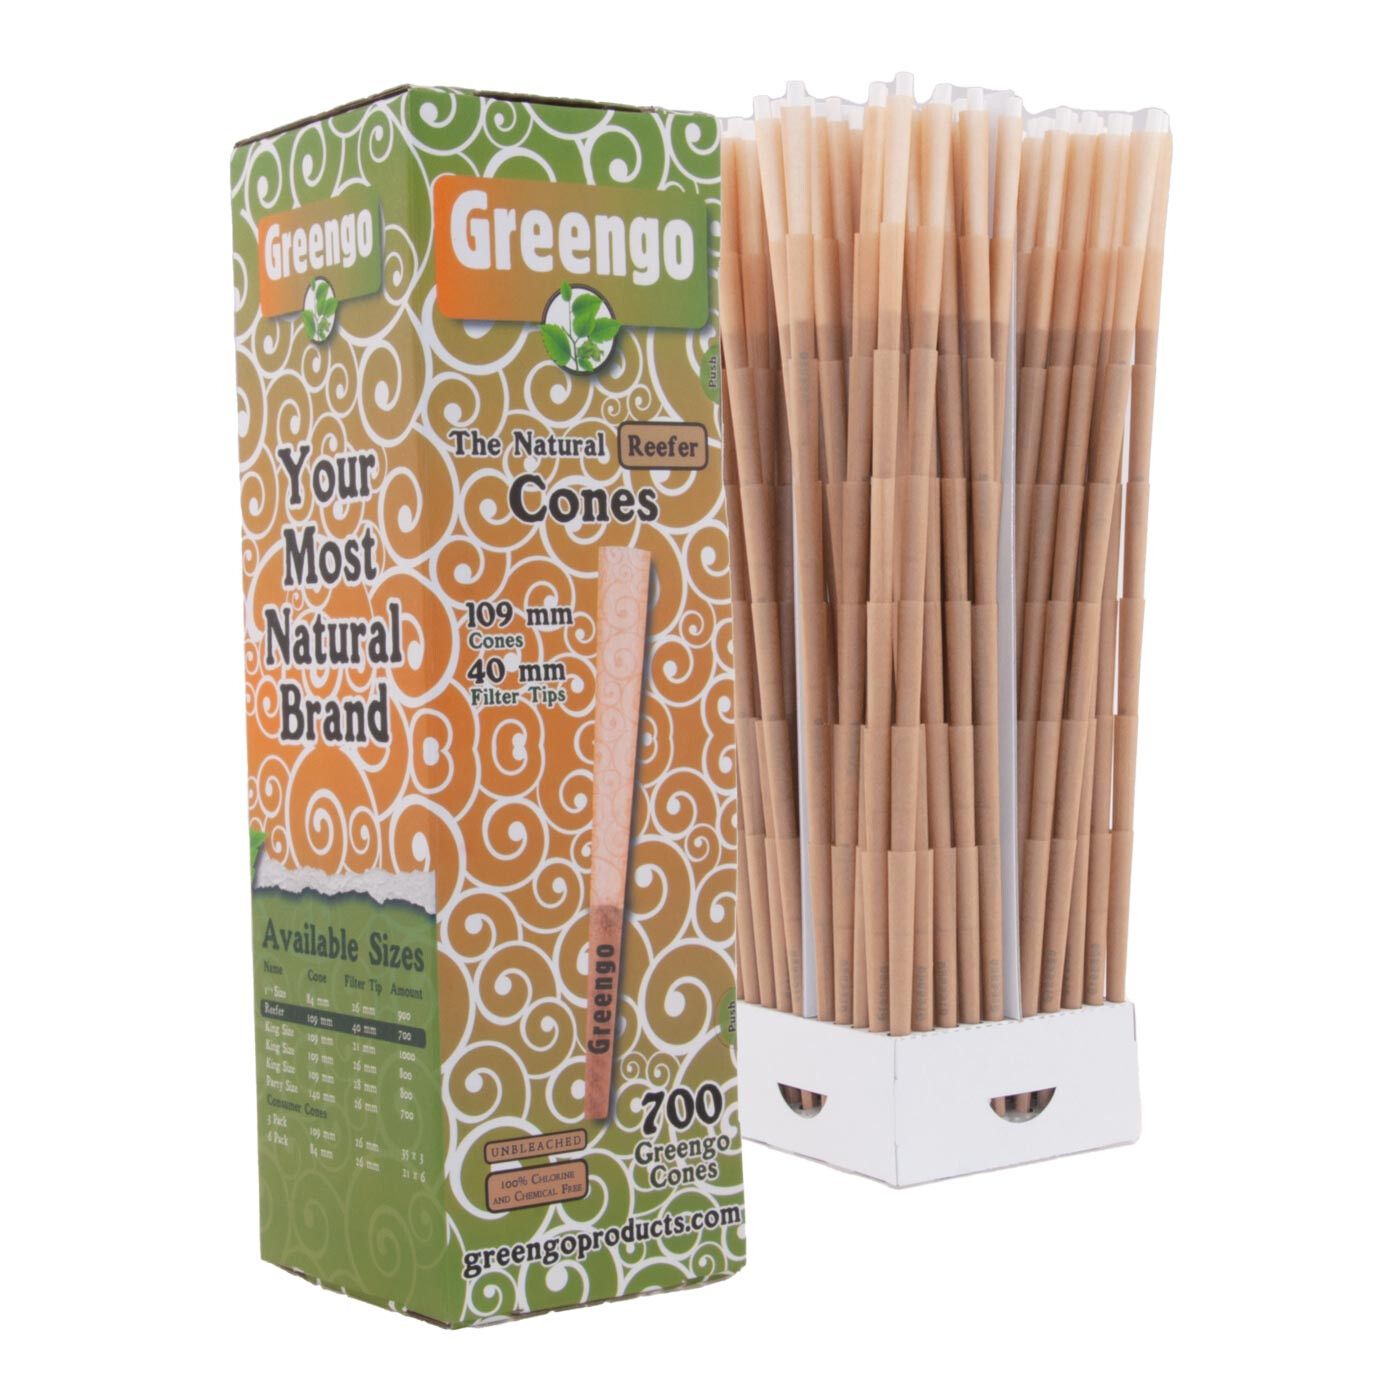 Greengo Cones King Size Reefer Unbleached 109/40Mm 700 Pcs